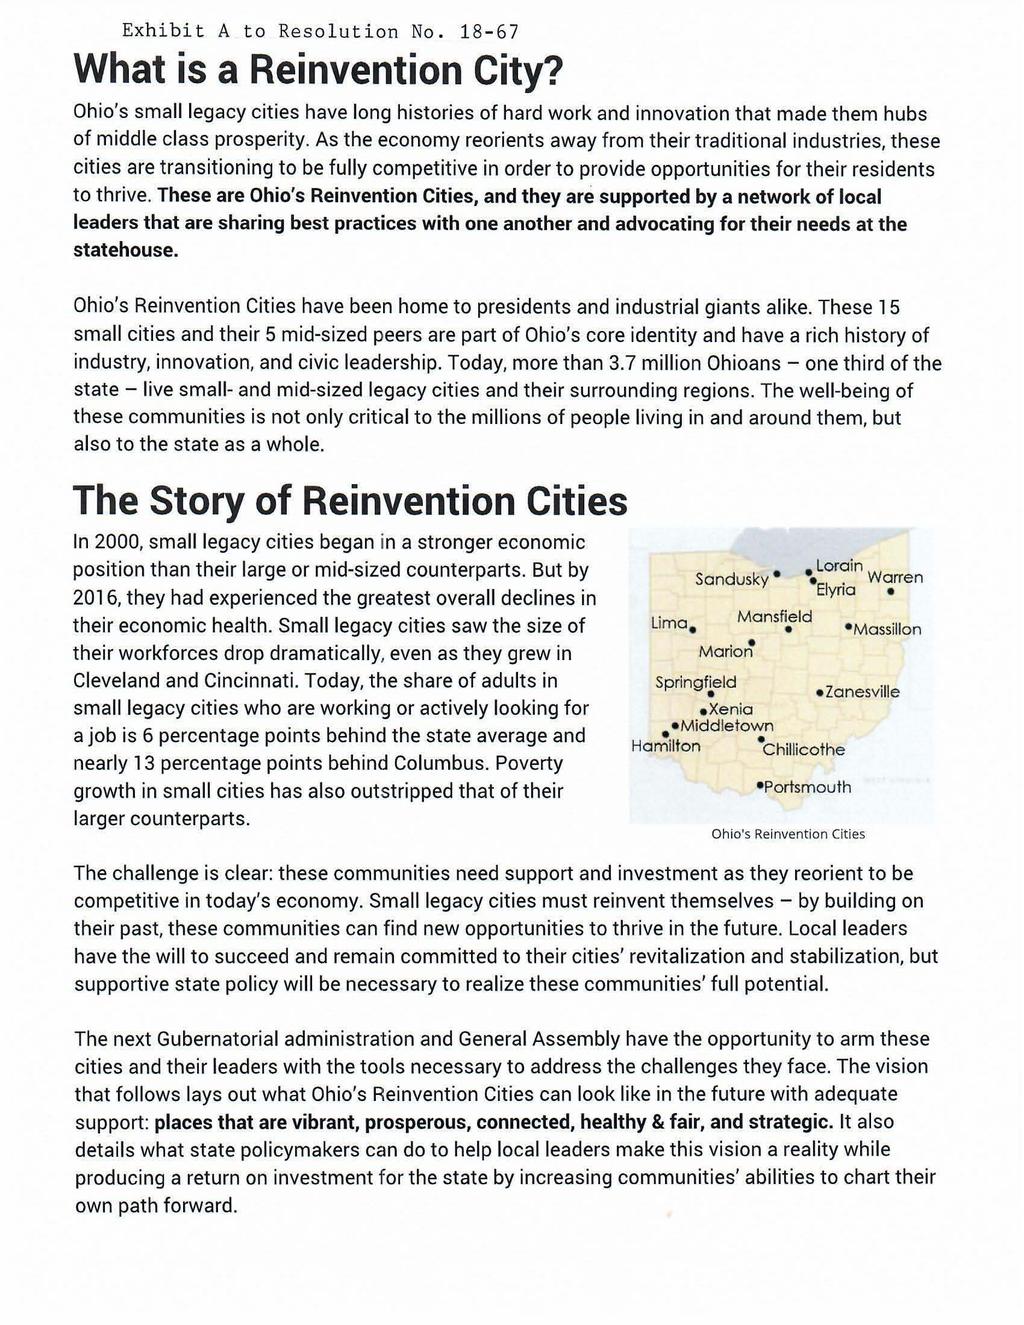 Exhibit A to Resolution No. 18-67 What is a Reinvention City? Ohio's small legacy cities have long histories of hard work and innovation that made them hubs of middle class prosperity.